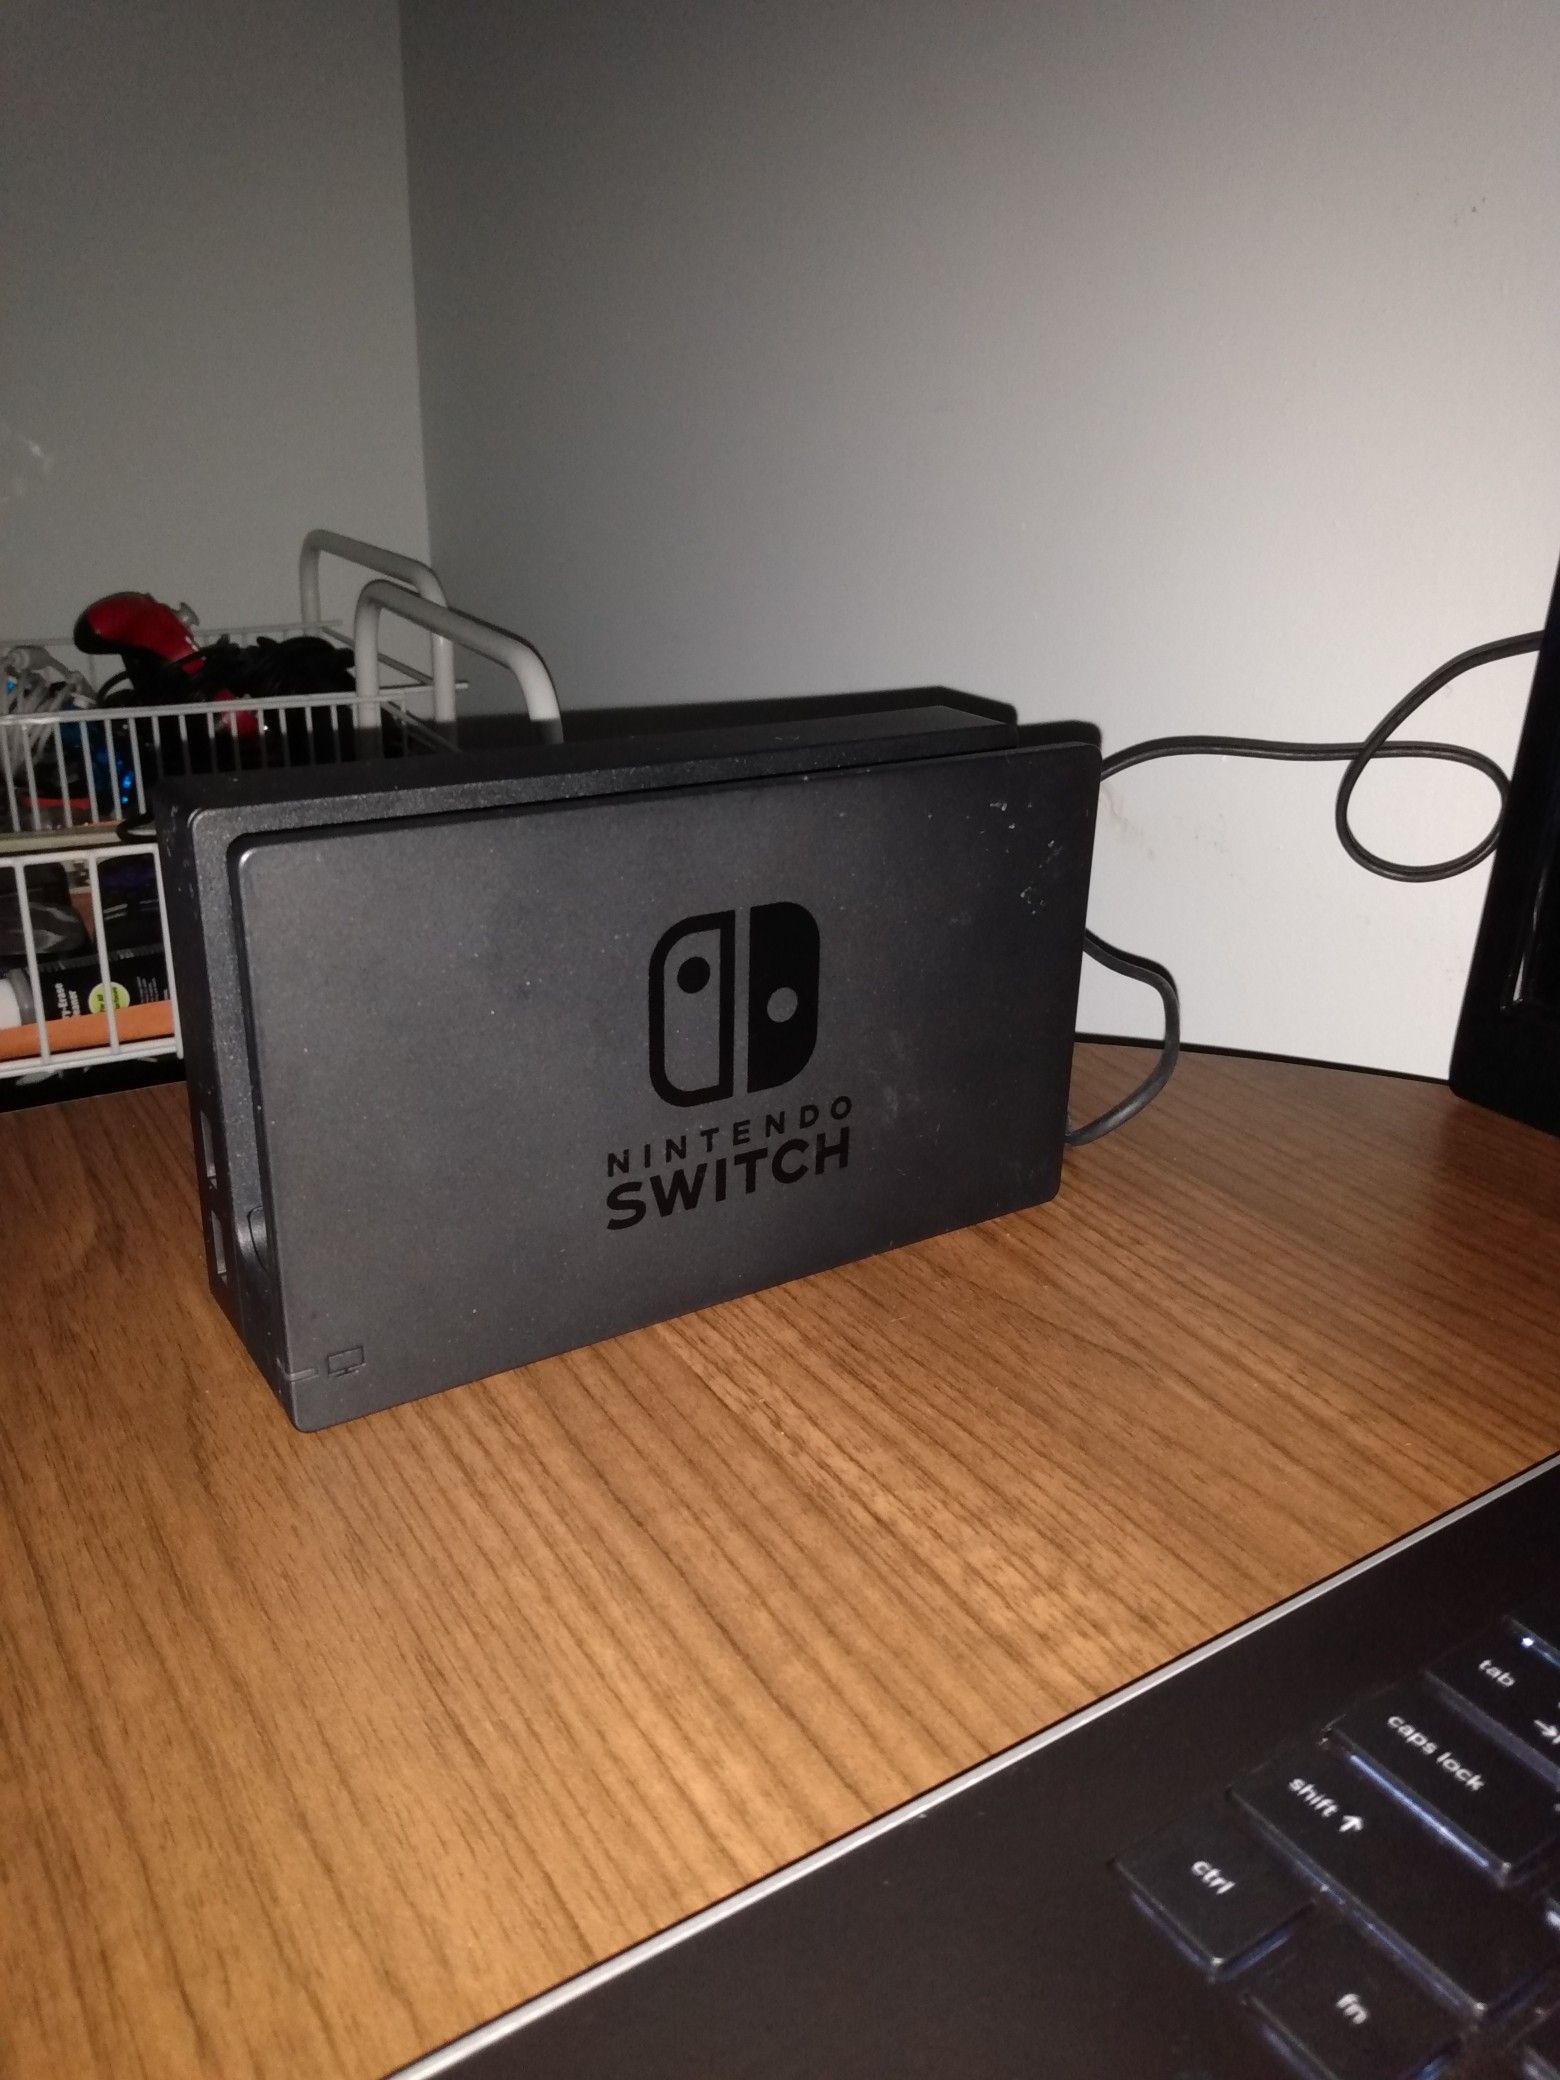 Nintendo switch dock and official charger